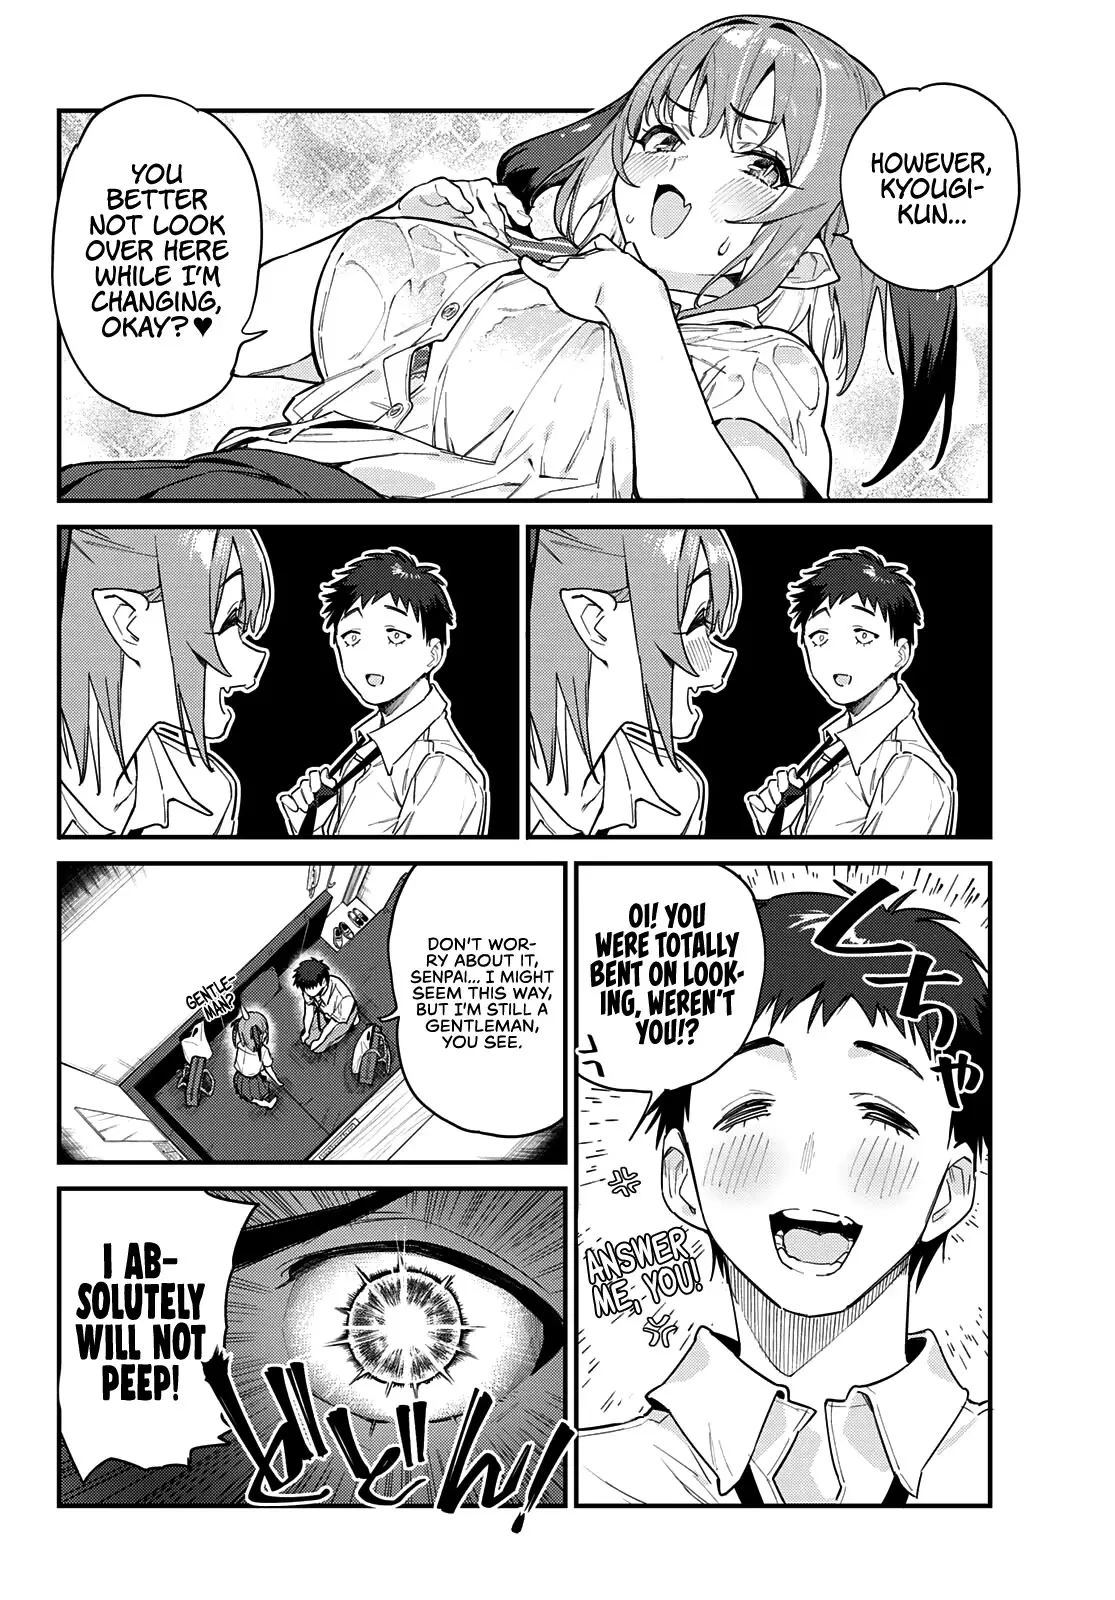 Kanan-Sama Is Easy As Hell! - 27 page 3-0e7514c7